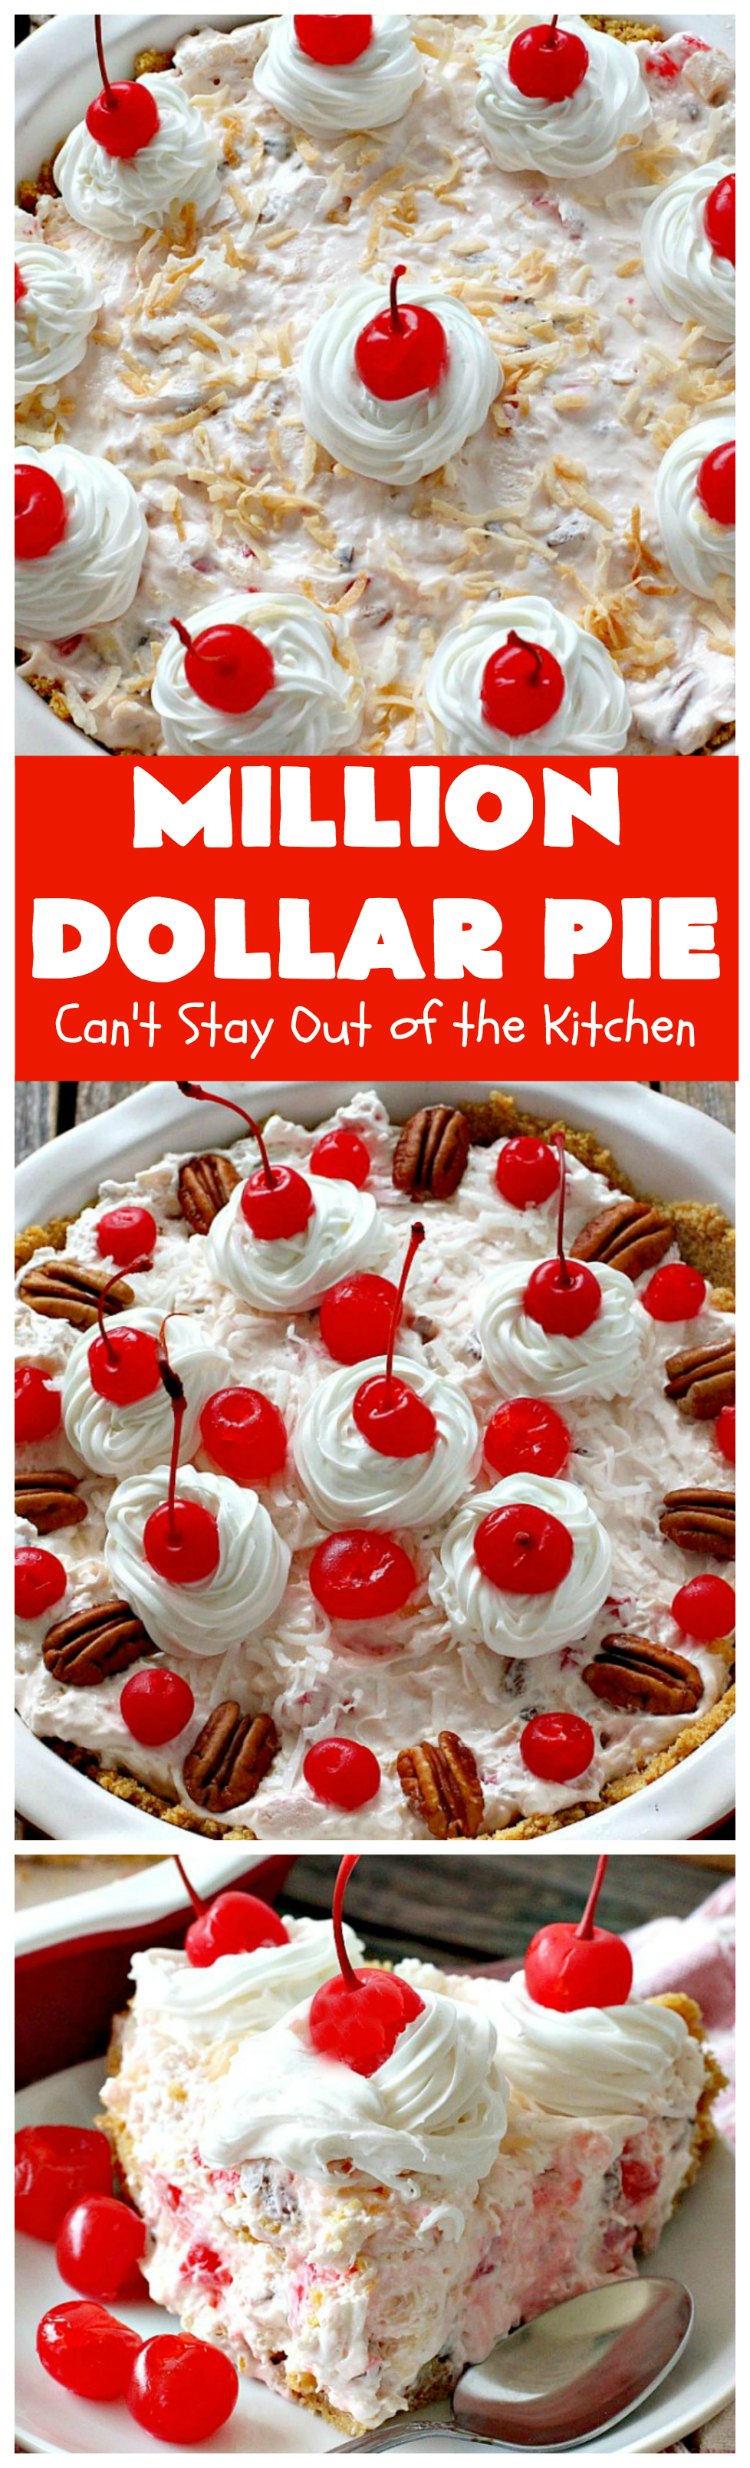 Million Dollar Pie – Can't Stay Out of the Kitchen